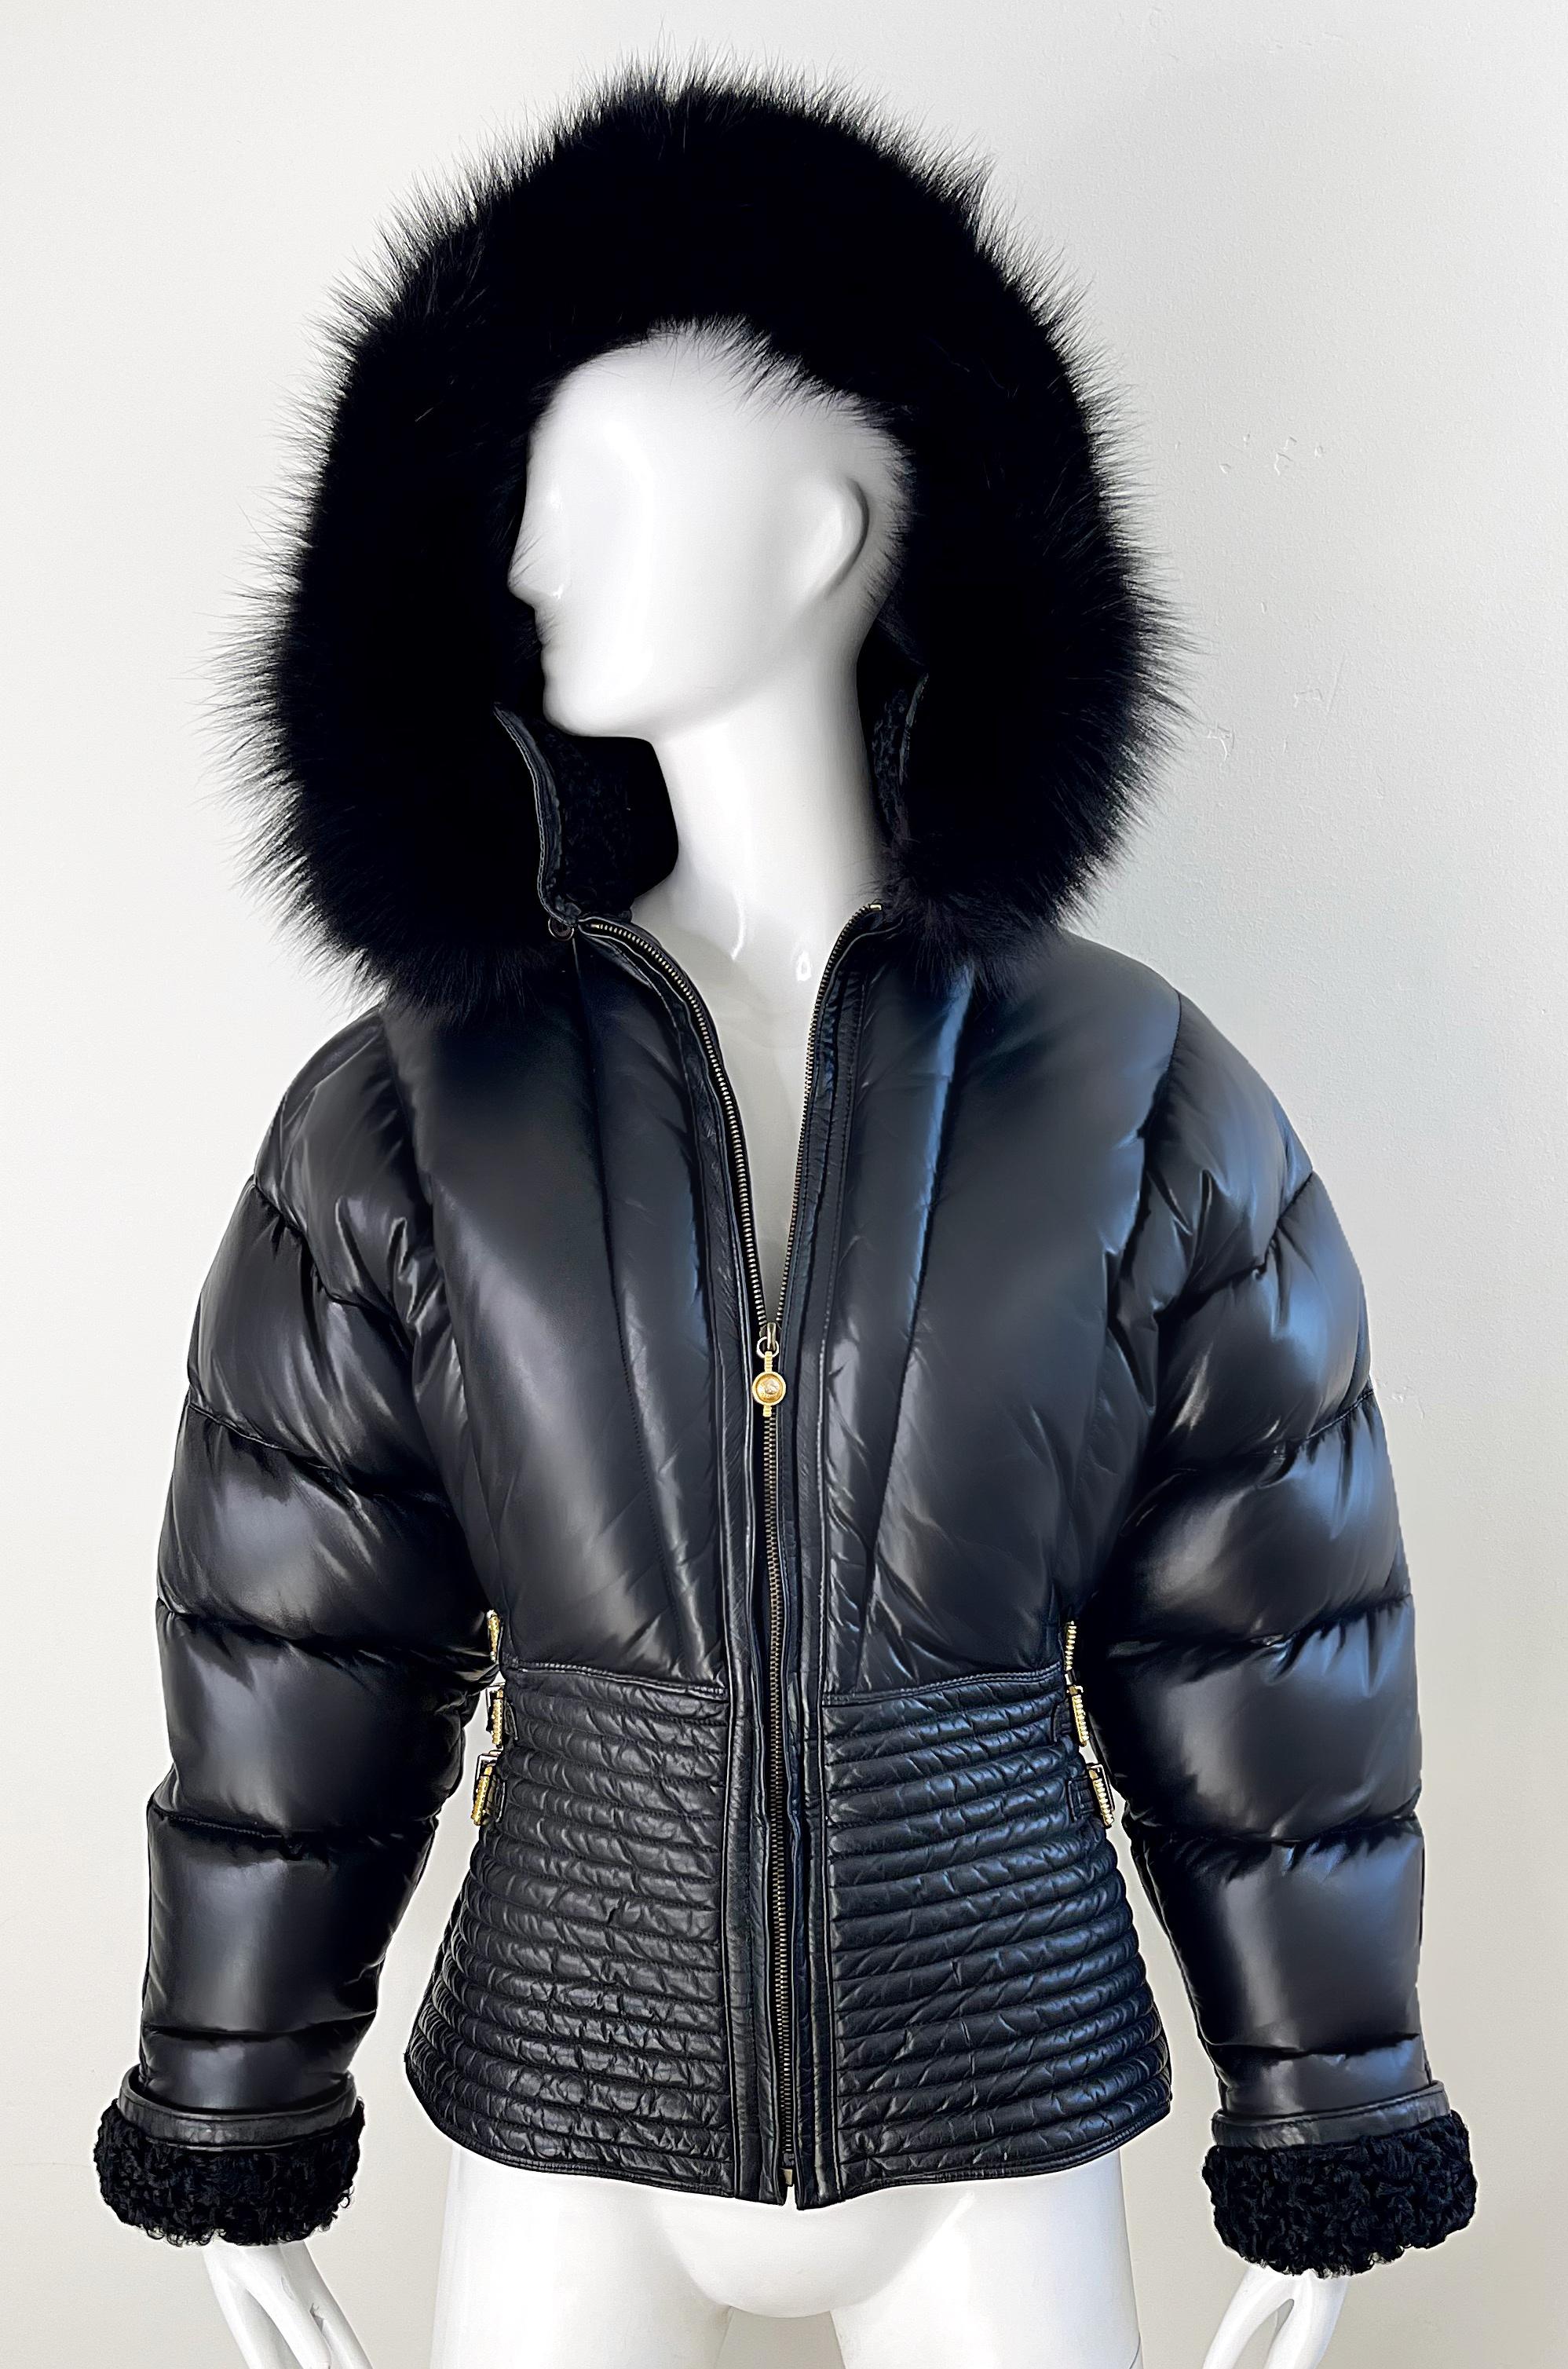 Gianni Versace Runway F/W 1992 Bondage Collection Leather Fox Astrakhan Jacket For Sale 10